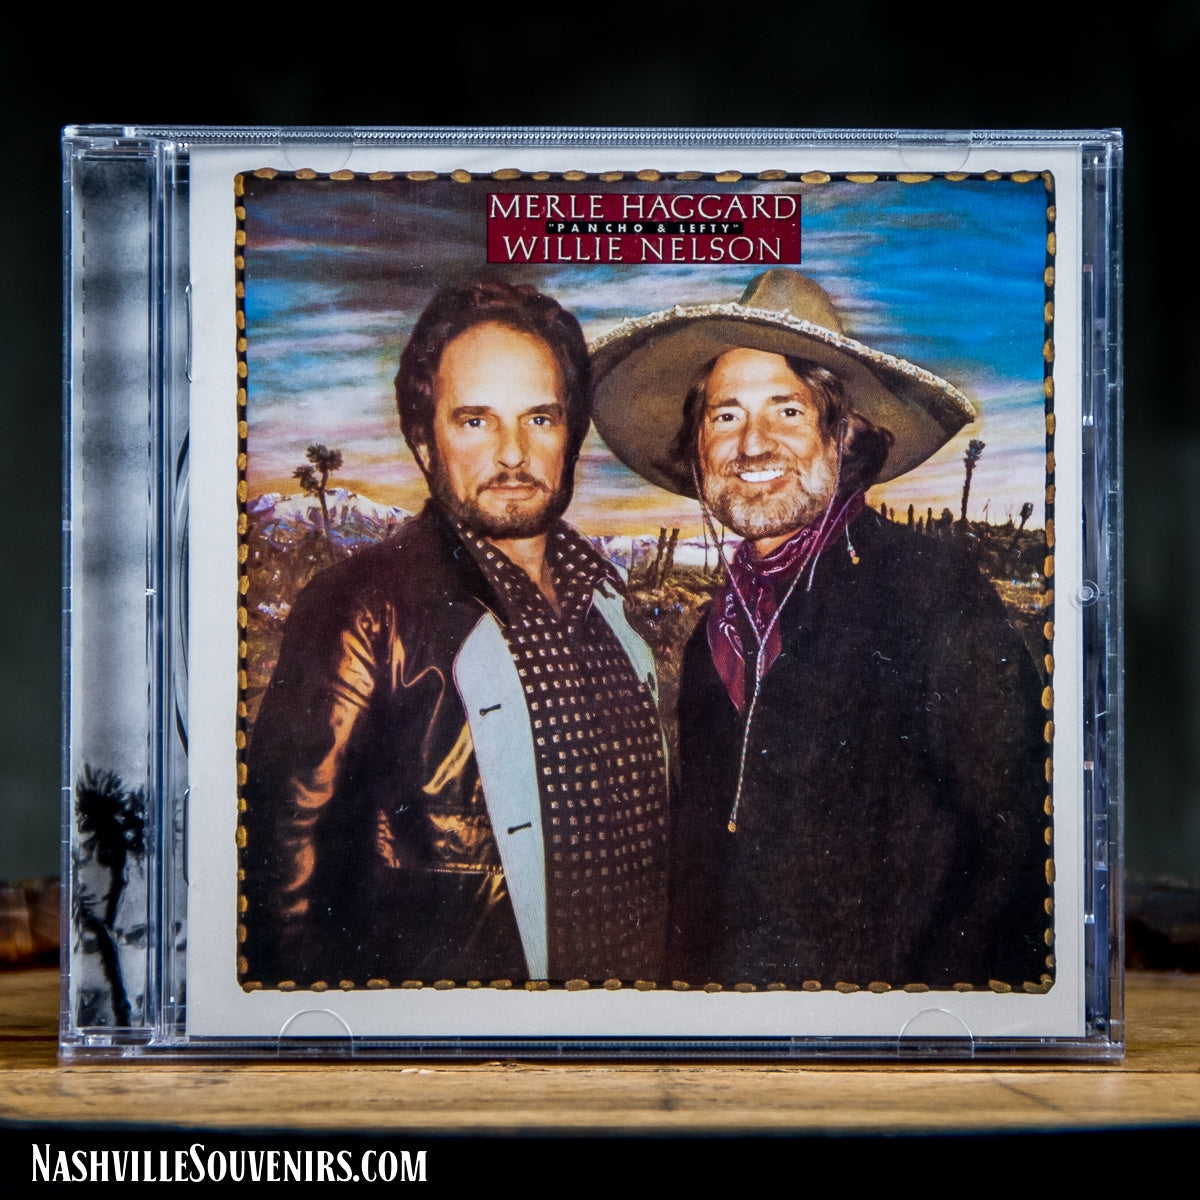 Willie Nelson and Merle Haggard, Pancho & Lefty CD